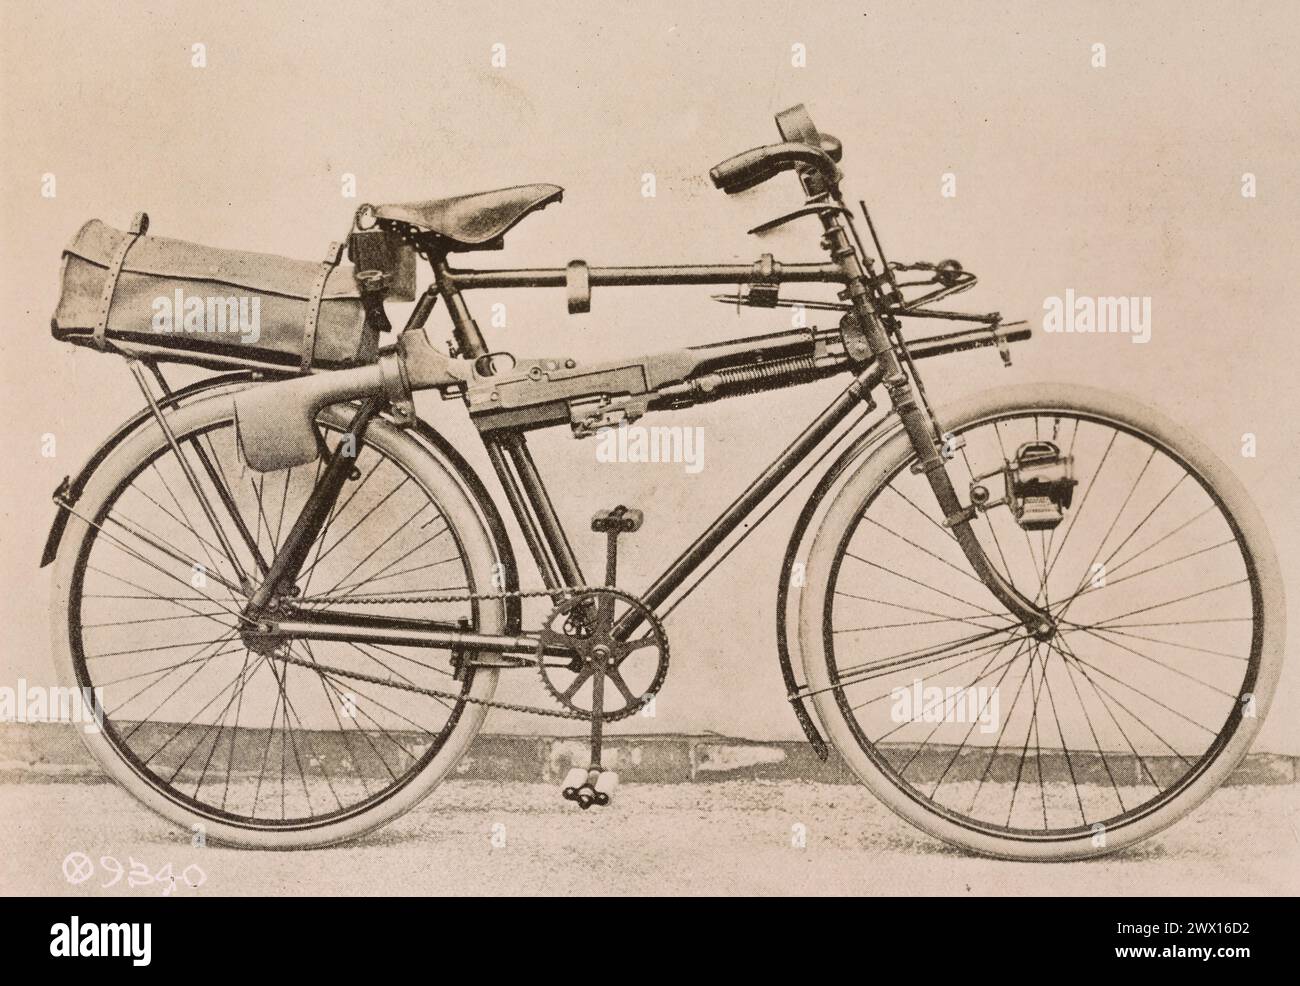 Bicycle with a .303 inch Hotchkiss gun carried through its frame ca. 1918 Stock Photo